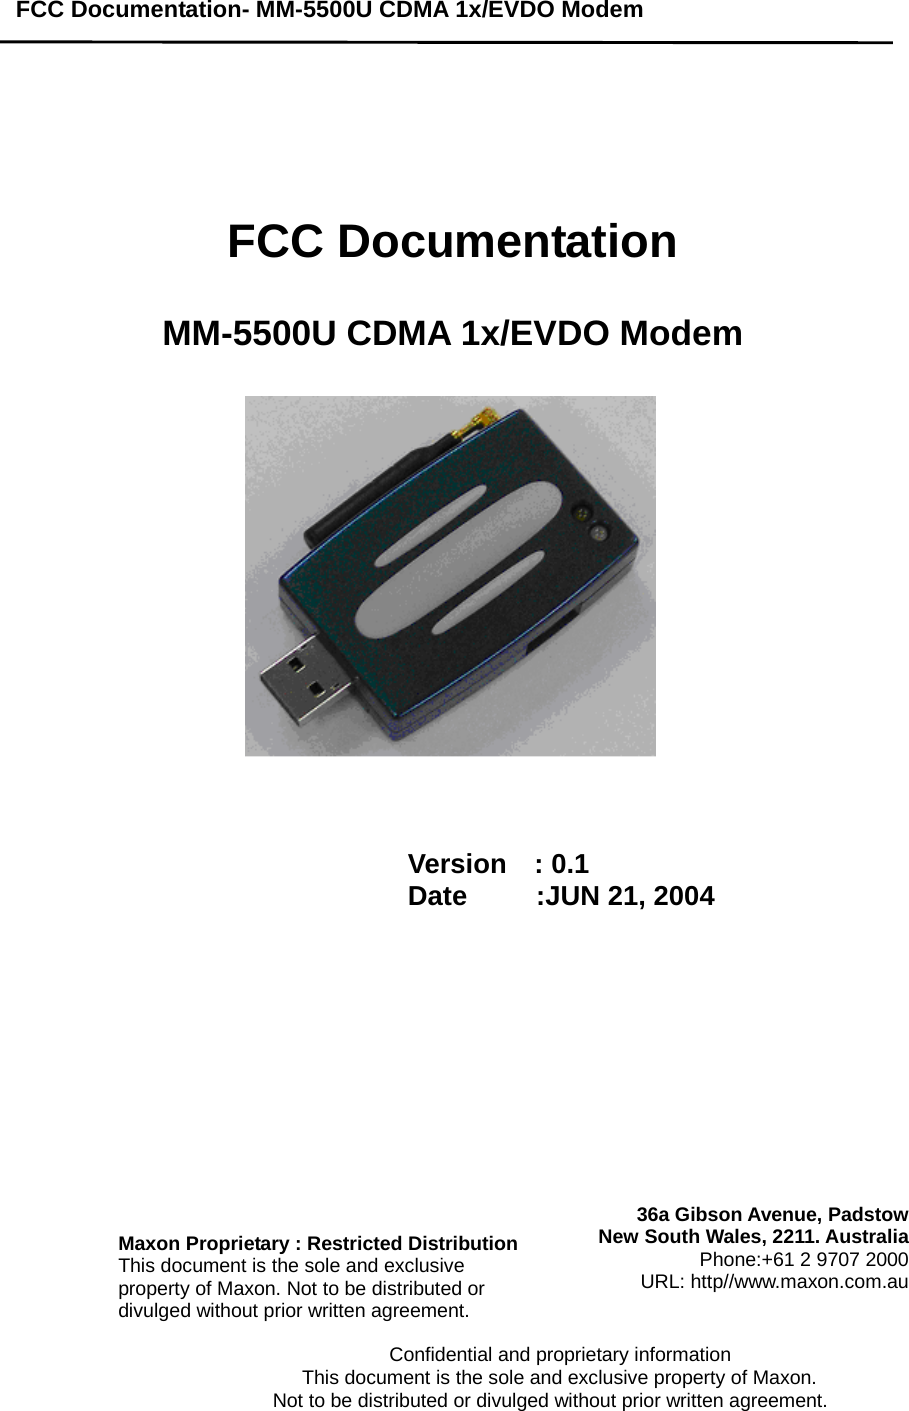 FCC Documentation- MM-5500U CDMA 1x/EVDO Modem                                              Confidential and proprietary information                          This document is the sole and exclusive property of Maxon.                           Not to be distributed or divulged without prior written agreement.        FCC Documentation   MM-5500U CDMA 1x/EVDO Modem       Version  : 0.1 Date     :JUN 21, 2004    Maxon Proprietary : Restricted DistributionThis document is the sole and exclusive property of Maxon. Not to be distributed or divulged without prior written agreement. 36a Gibson Avenue, PadstowNew South Wales, 2211. AustraliaPhone:+61 2 9707 2000URL: http//www.maxon.com.au